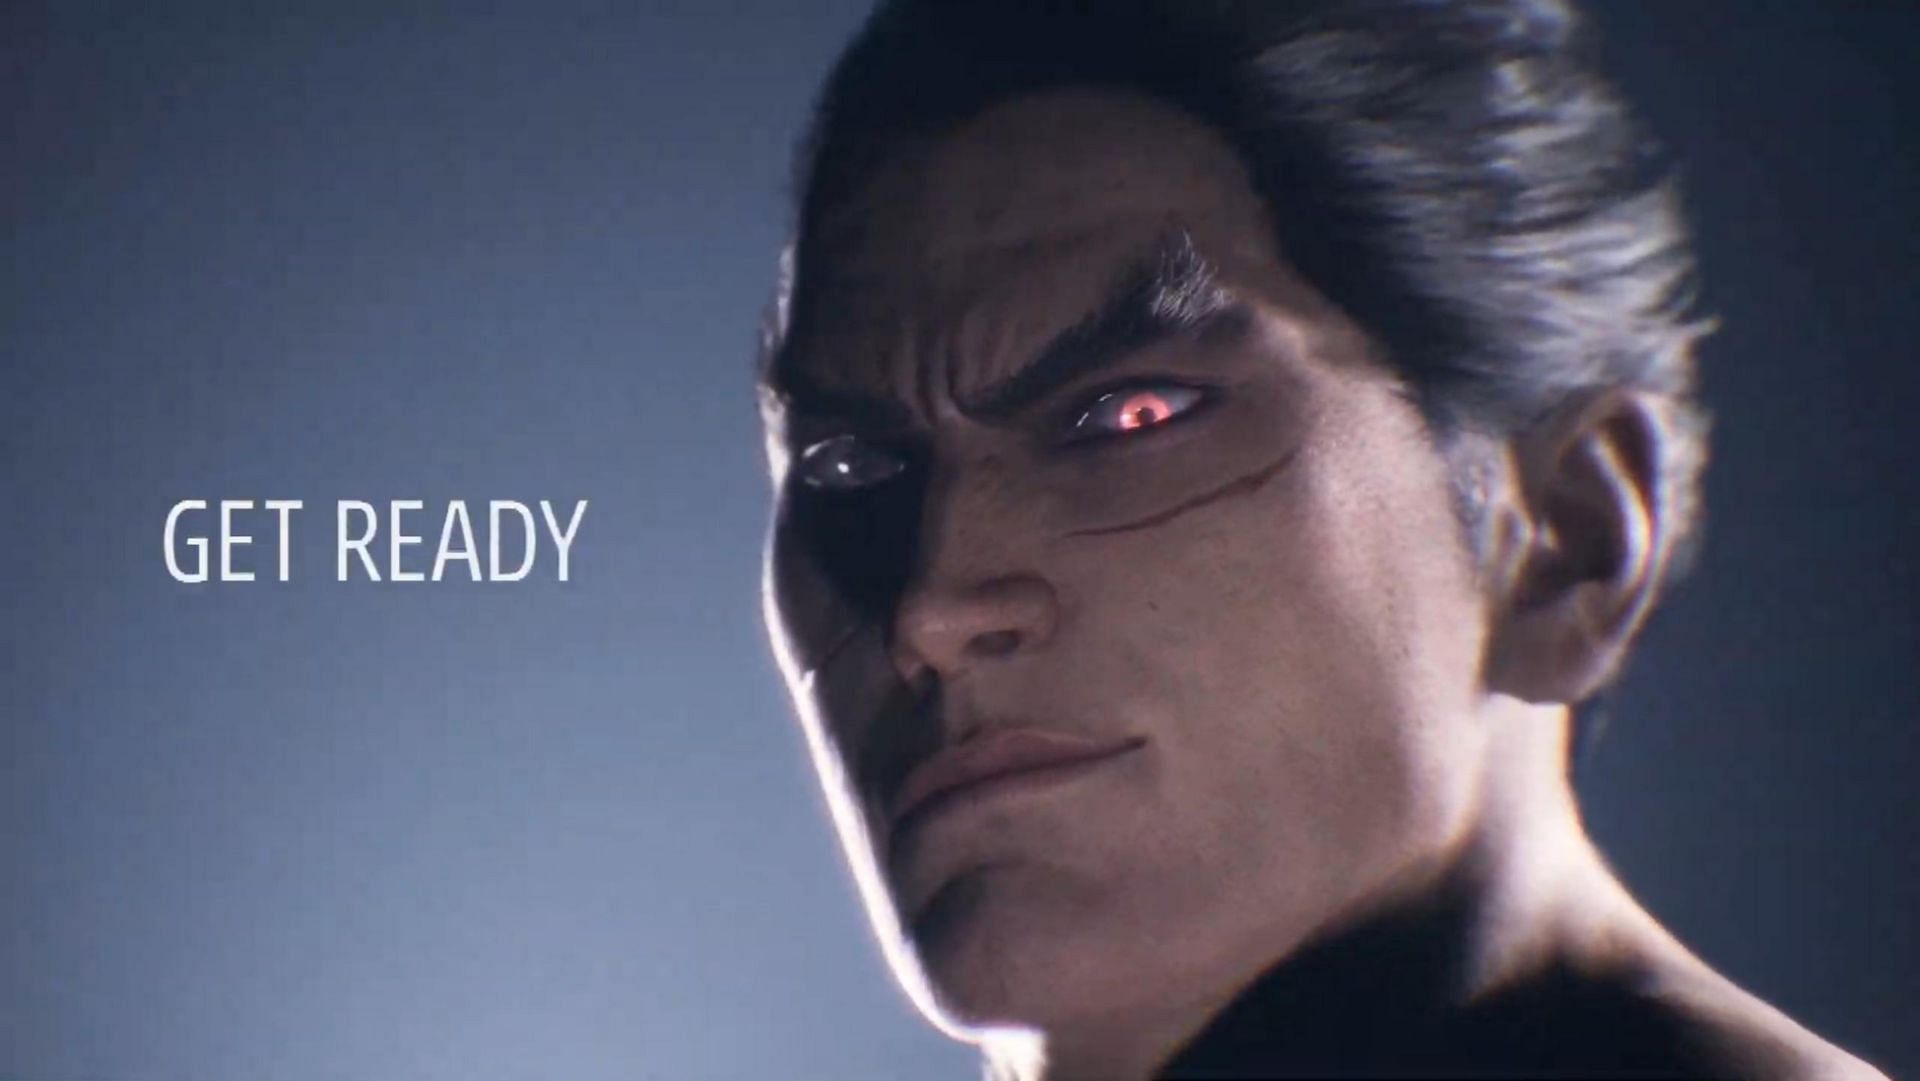 The new teaser features two versions of Kazuya (Image via Bandai Namco)